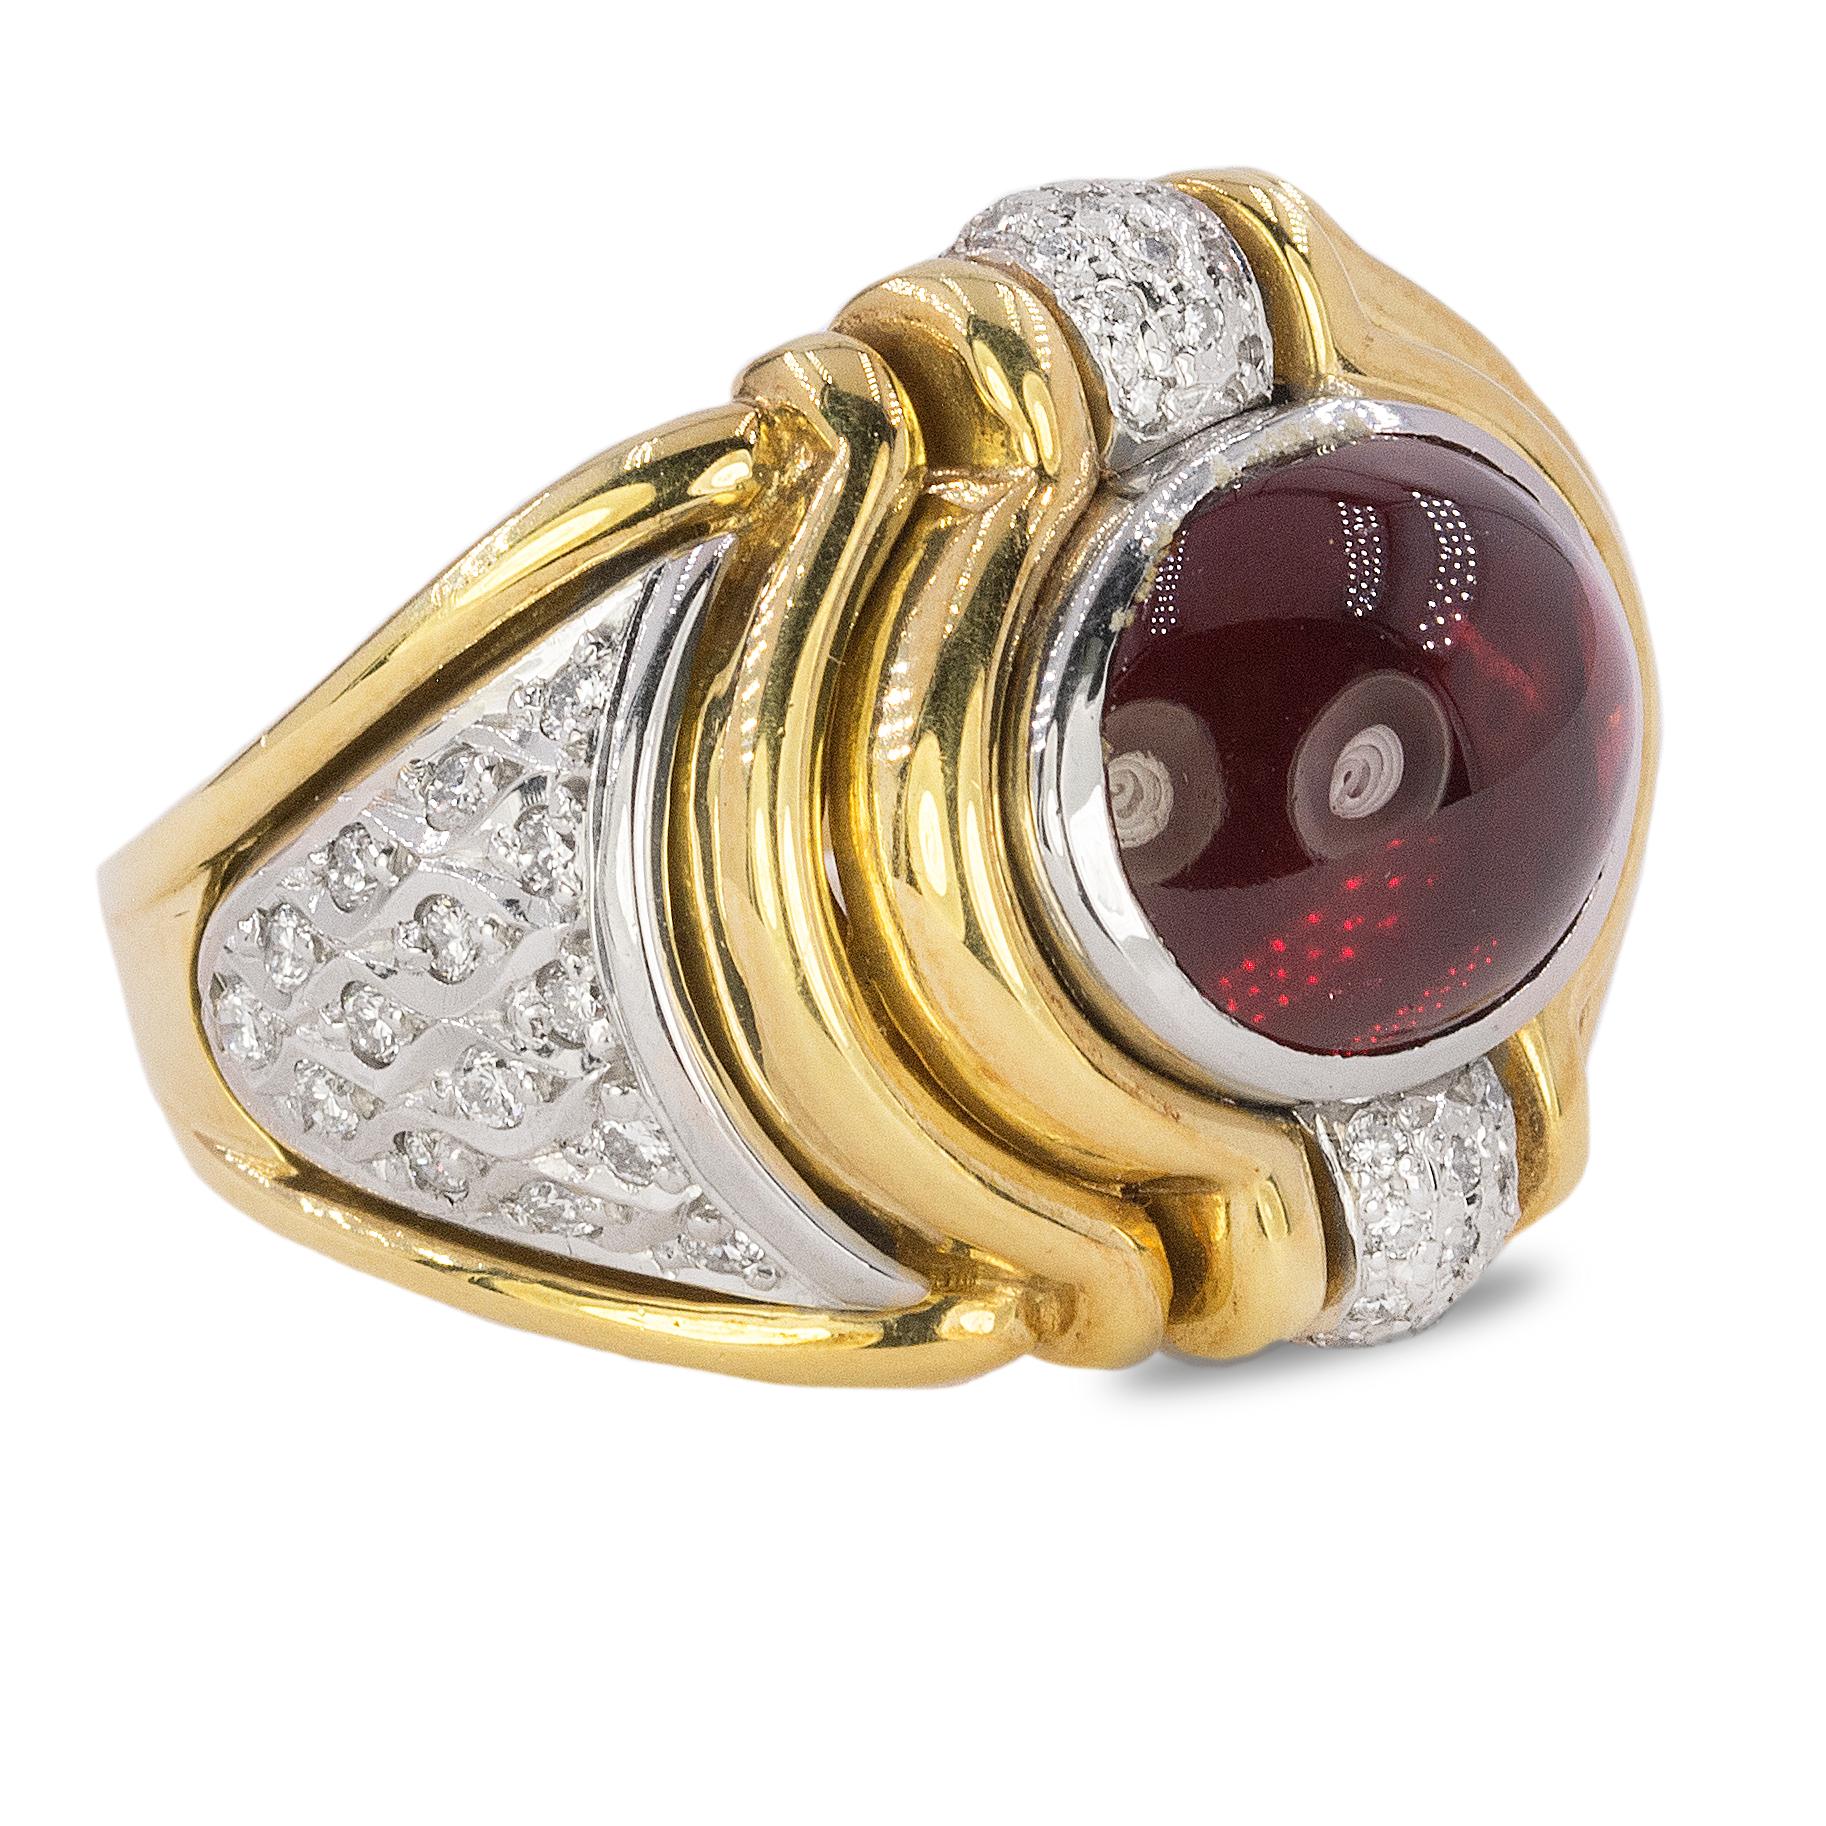 18k Ring with 8.25 carat cabochon Tourmaline and 0.55 carats of round brilliant diamonds, possibly Bulgari